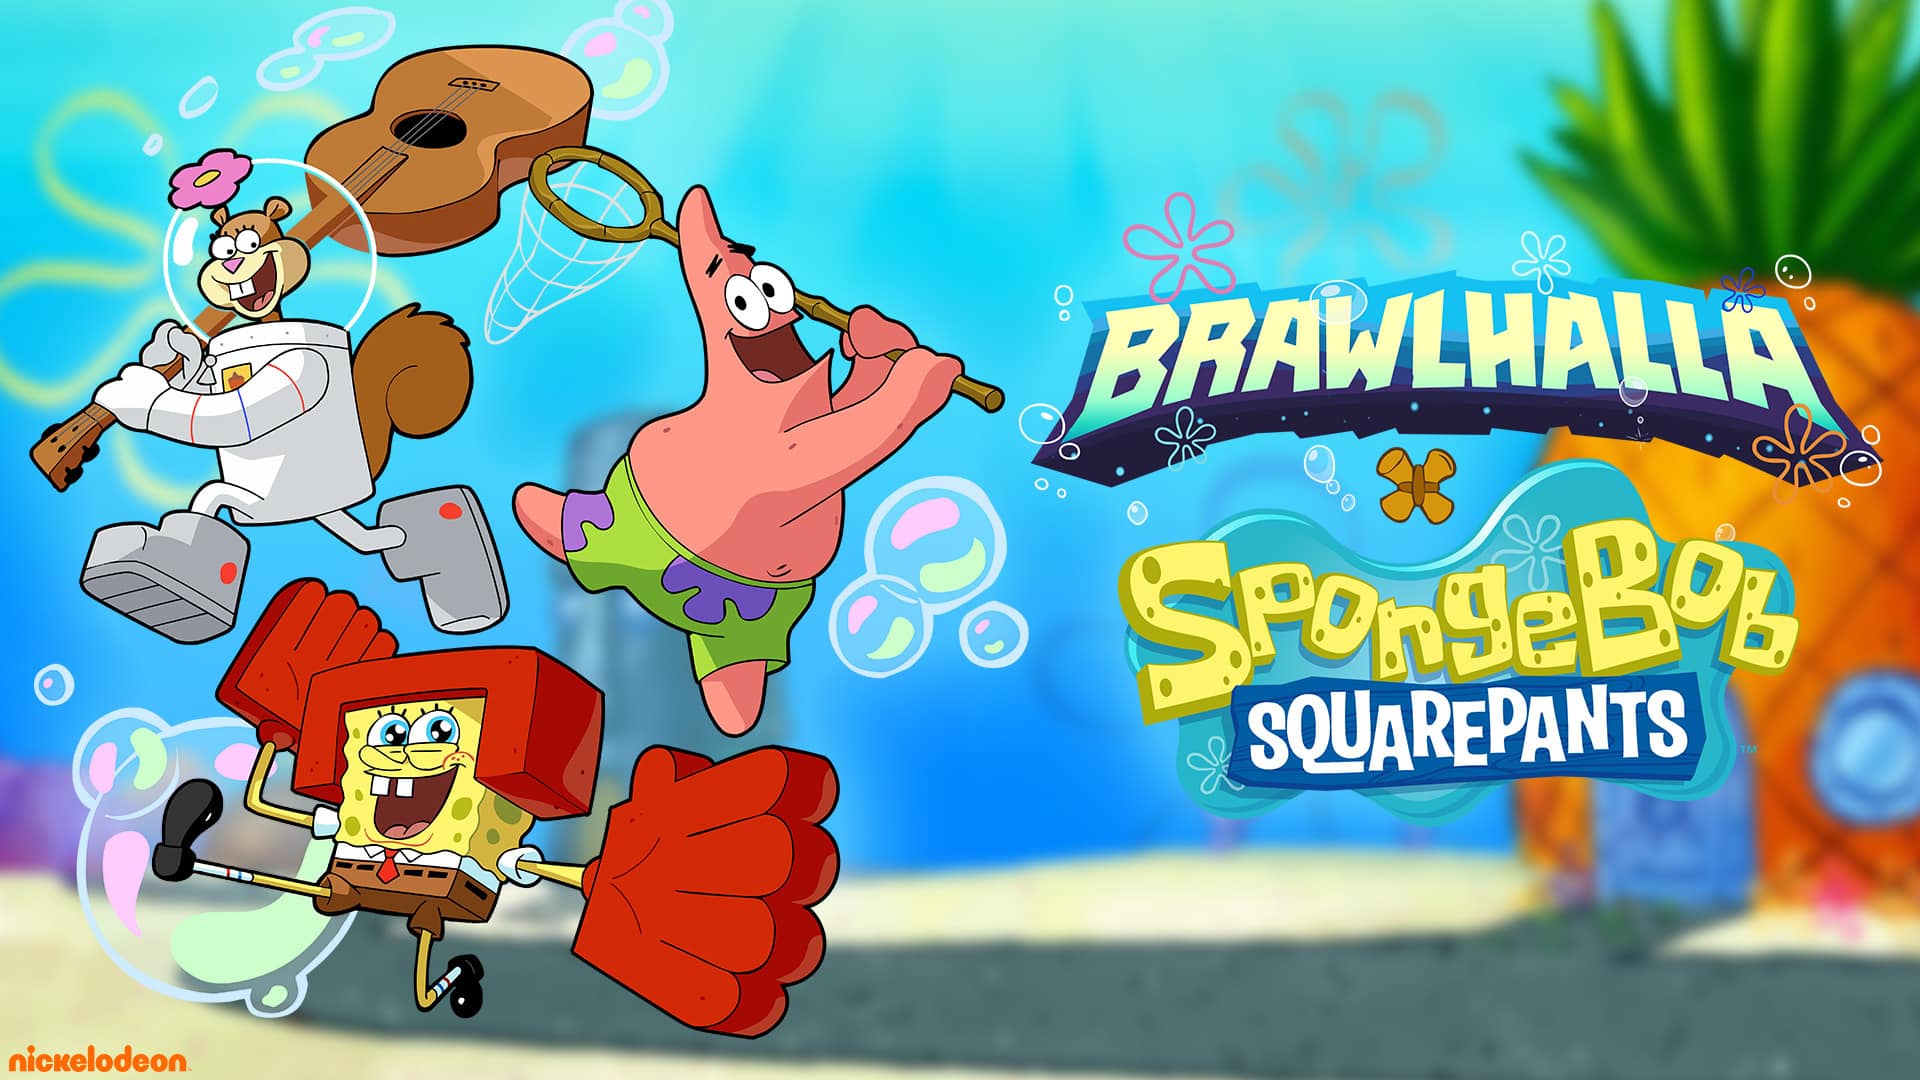 Brawlhalla Update 8.02 Swims Out for SpongeBob Crossover Patch 11.29